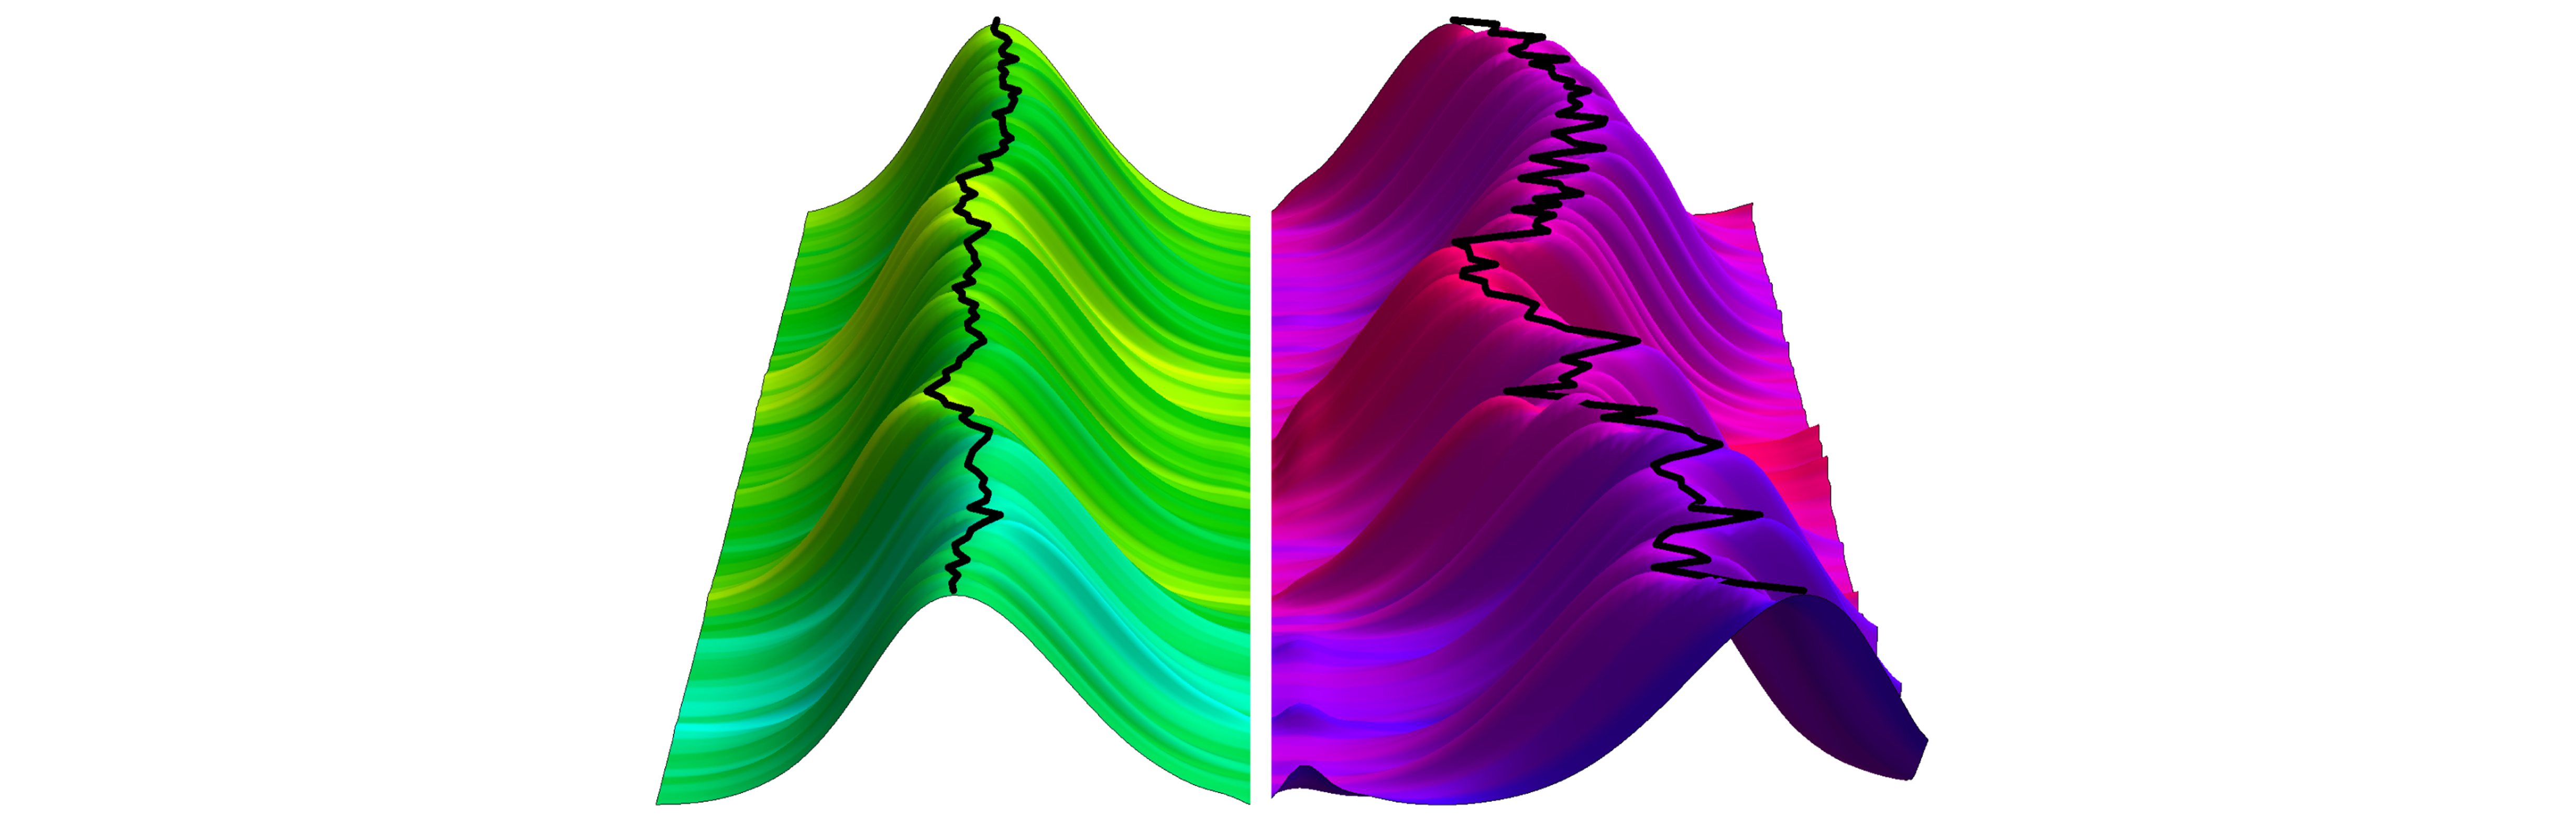 By analyzing the signals of individual neurons, neuroscientists have deciphered the code the brain uses to make the most of its inherently "noisy" neuronal circuits. These green and purple hills represent the average activity for many neurons in two different brain regions. These neuronal activity patterns will differ from time to time, even in response to exactly the same sensory stimulus, and those differences set the limit for how well the brain can sense things. CREDIT: X Pitkow/Rice University